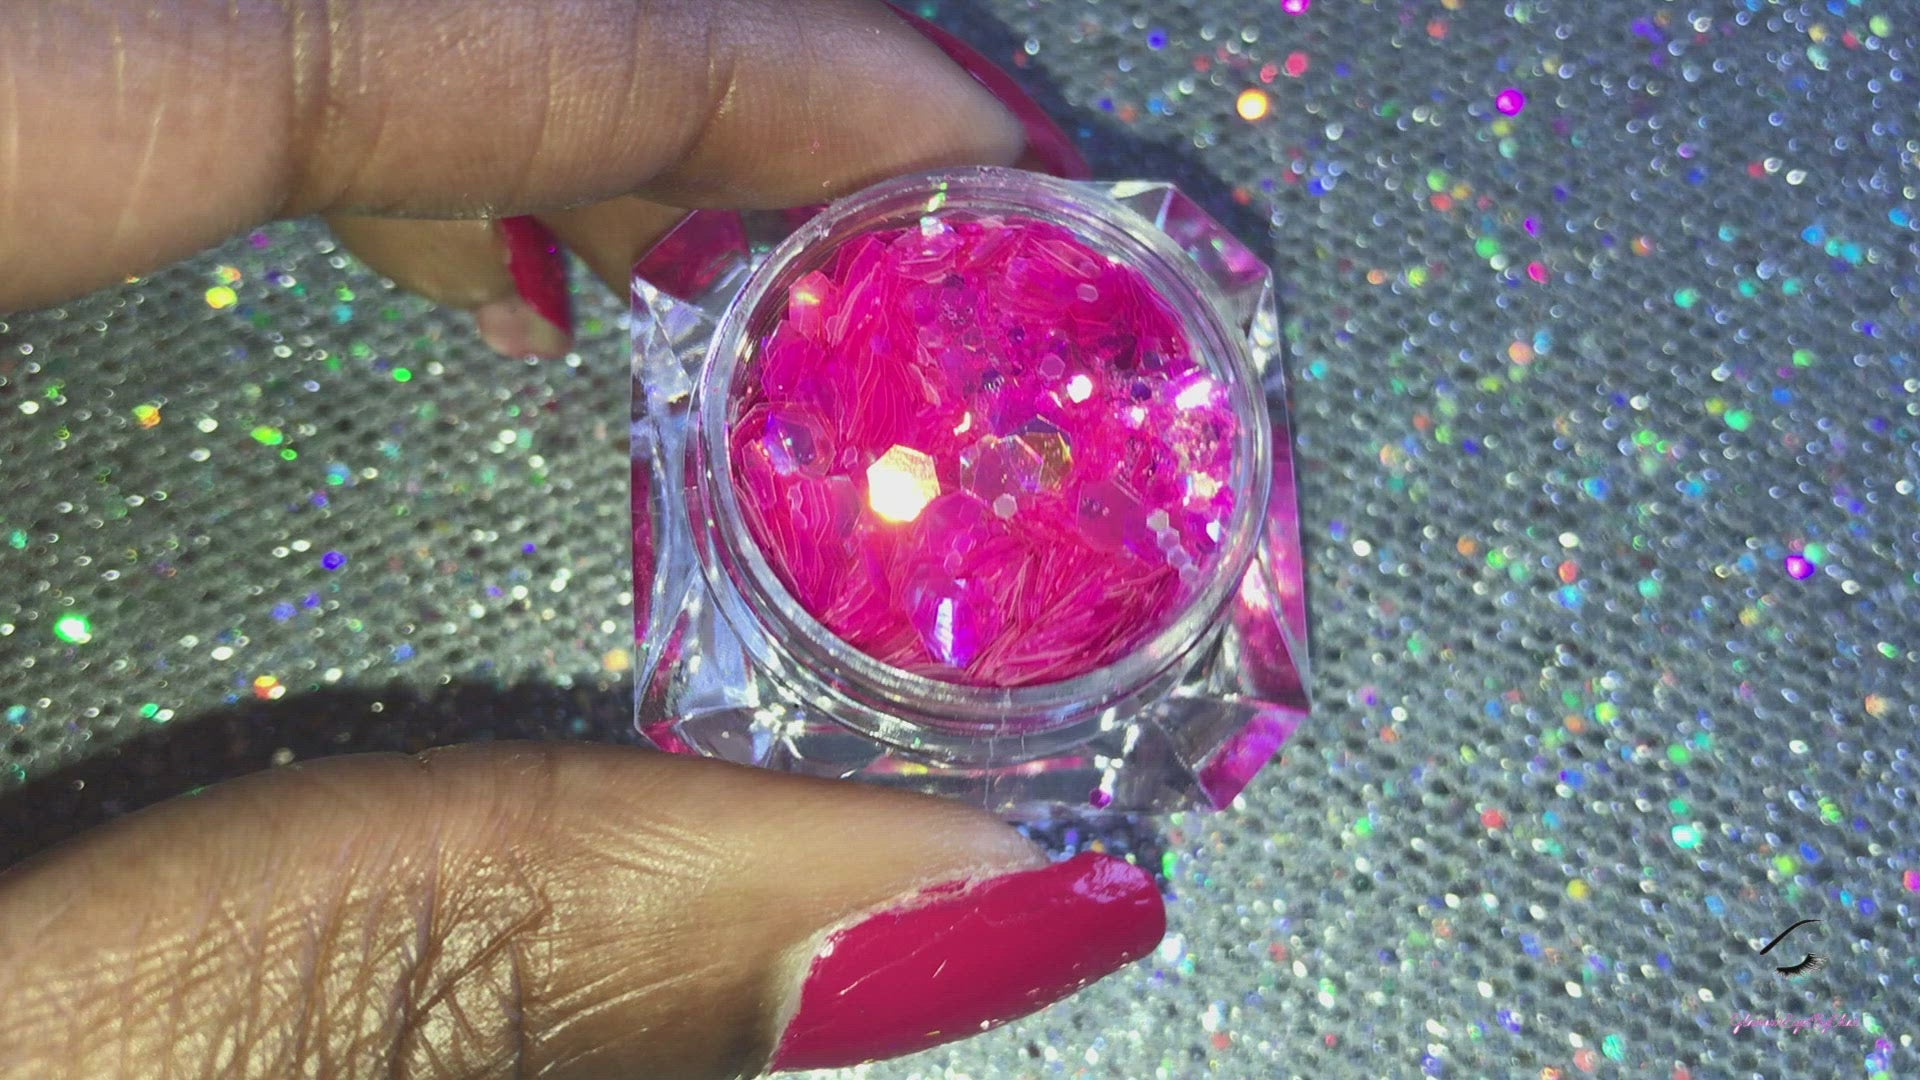 This glitter is called Candy Shop and is part of the super chunky glitter collection.  It consists of fuchsia glitter with an iridescent sparkle. Candy Shop can be used for your face, body, hair and nails.  Comes in 5g jars only.